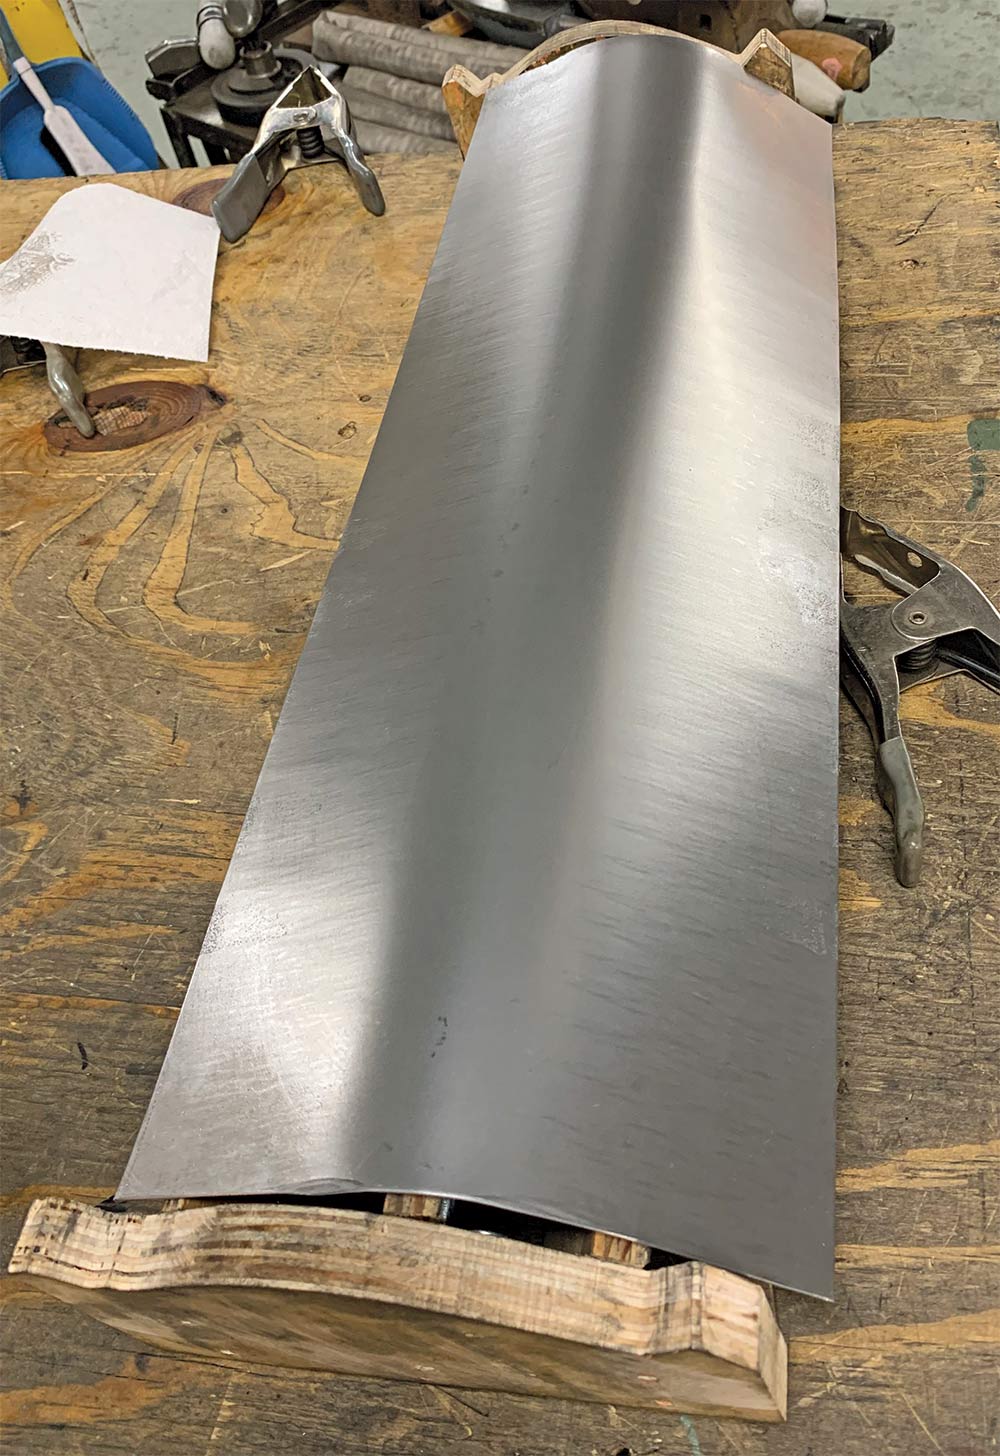 Top shot of the stretched metal sheet